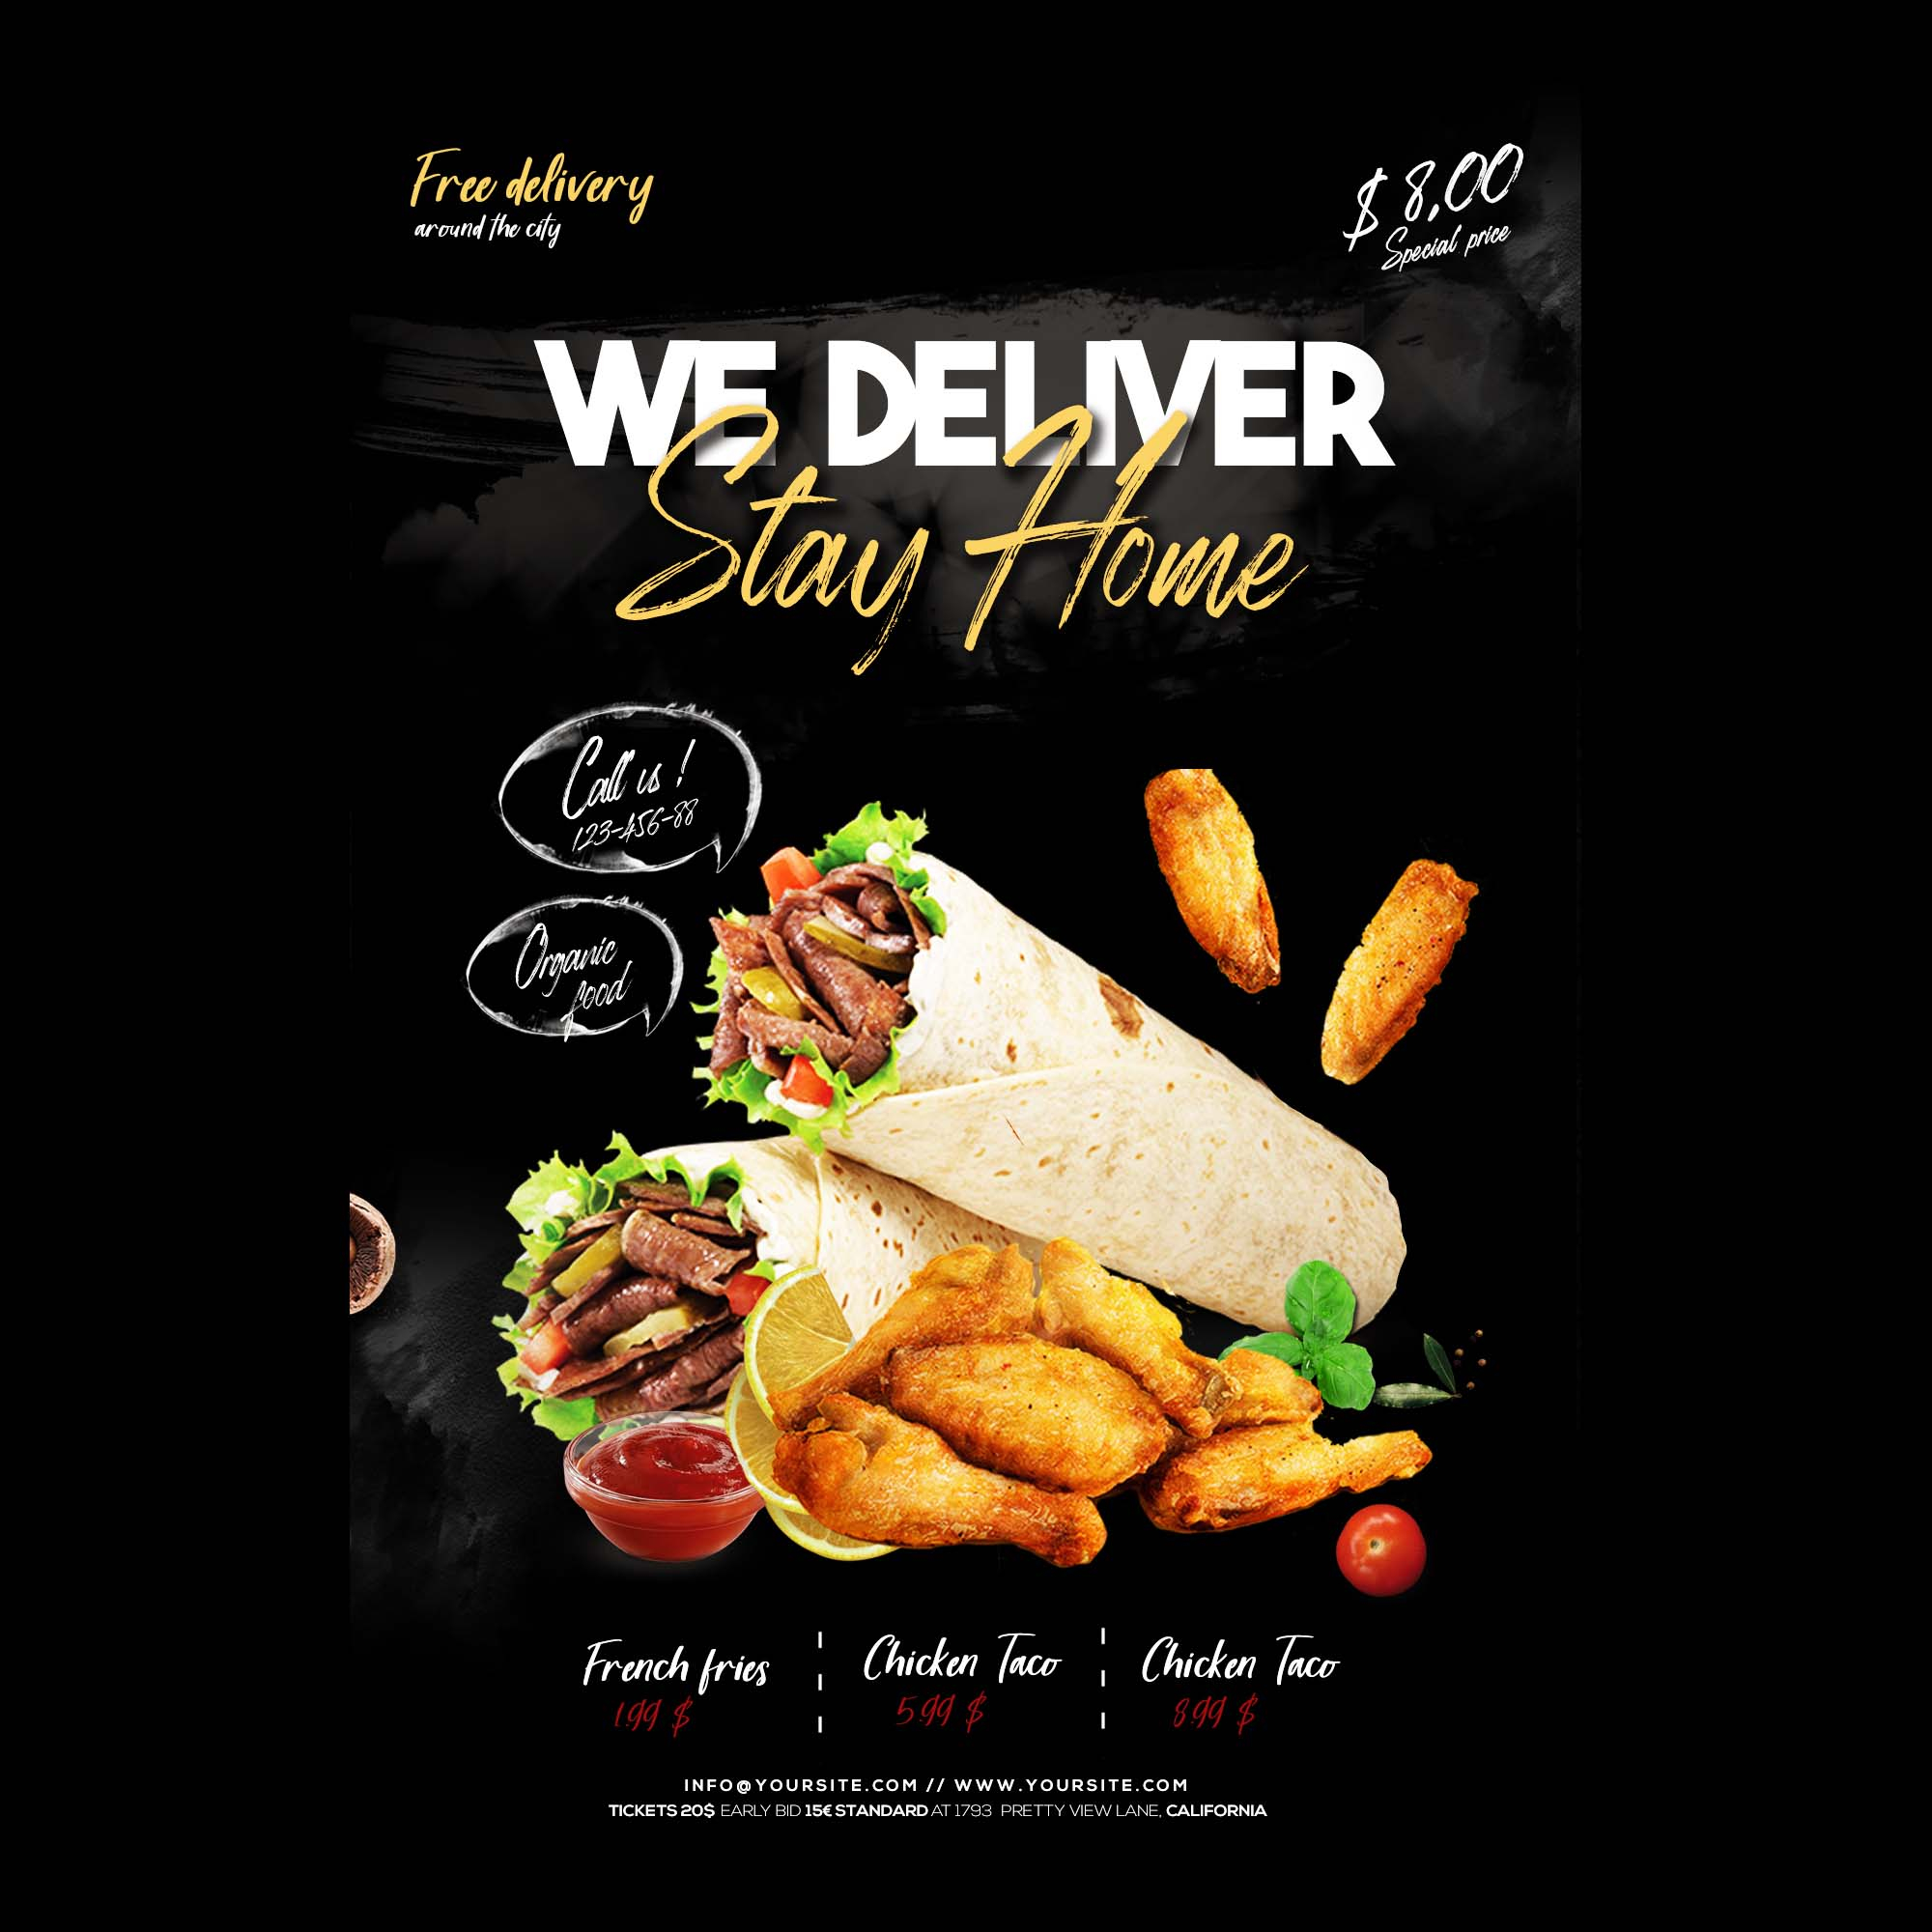 Free Home Delivery Food Flyer Template (PSD) Regarding Food Delivery Flyer Template In Food Delivery Flyer Template